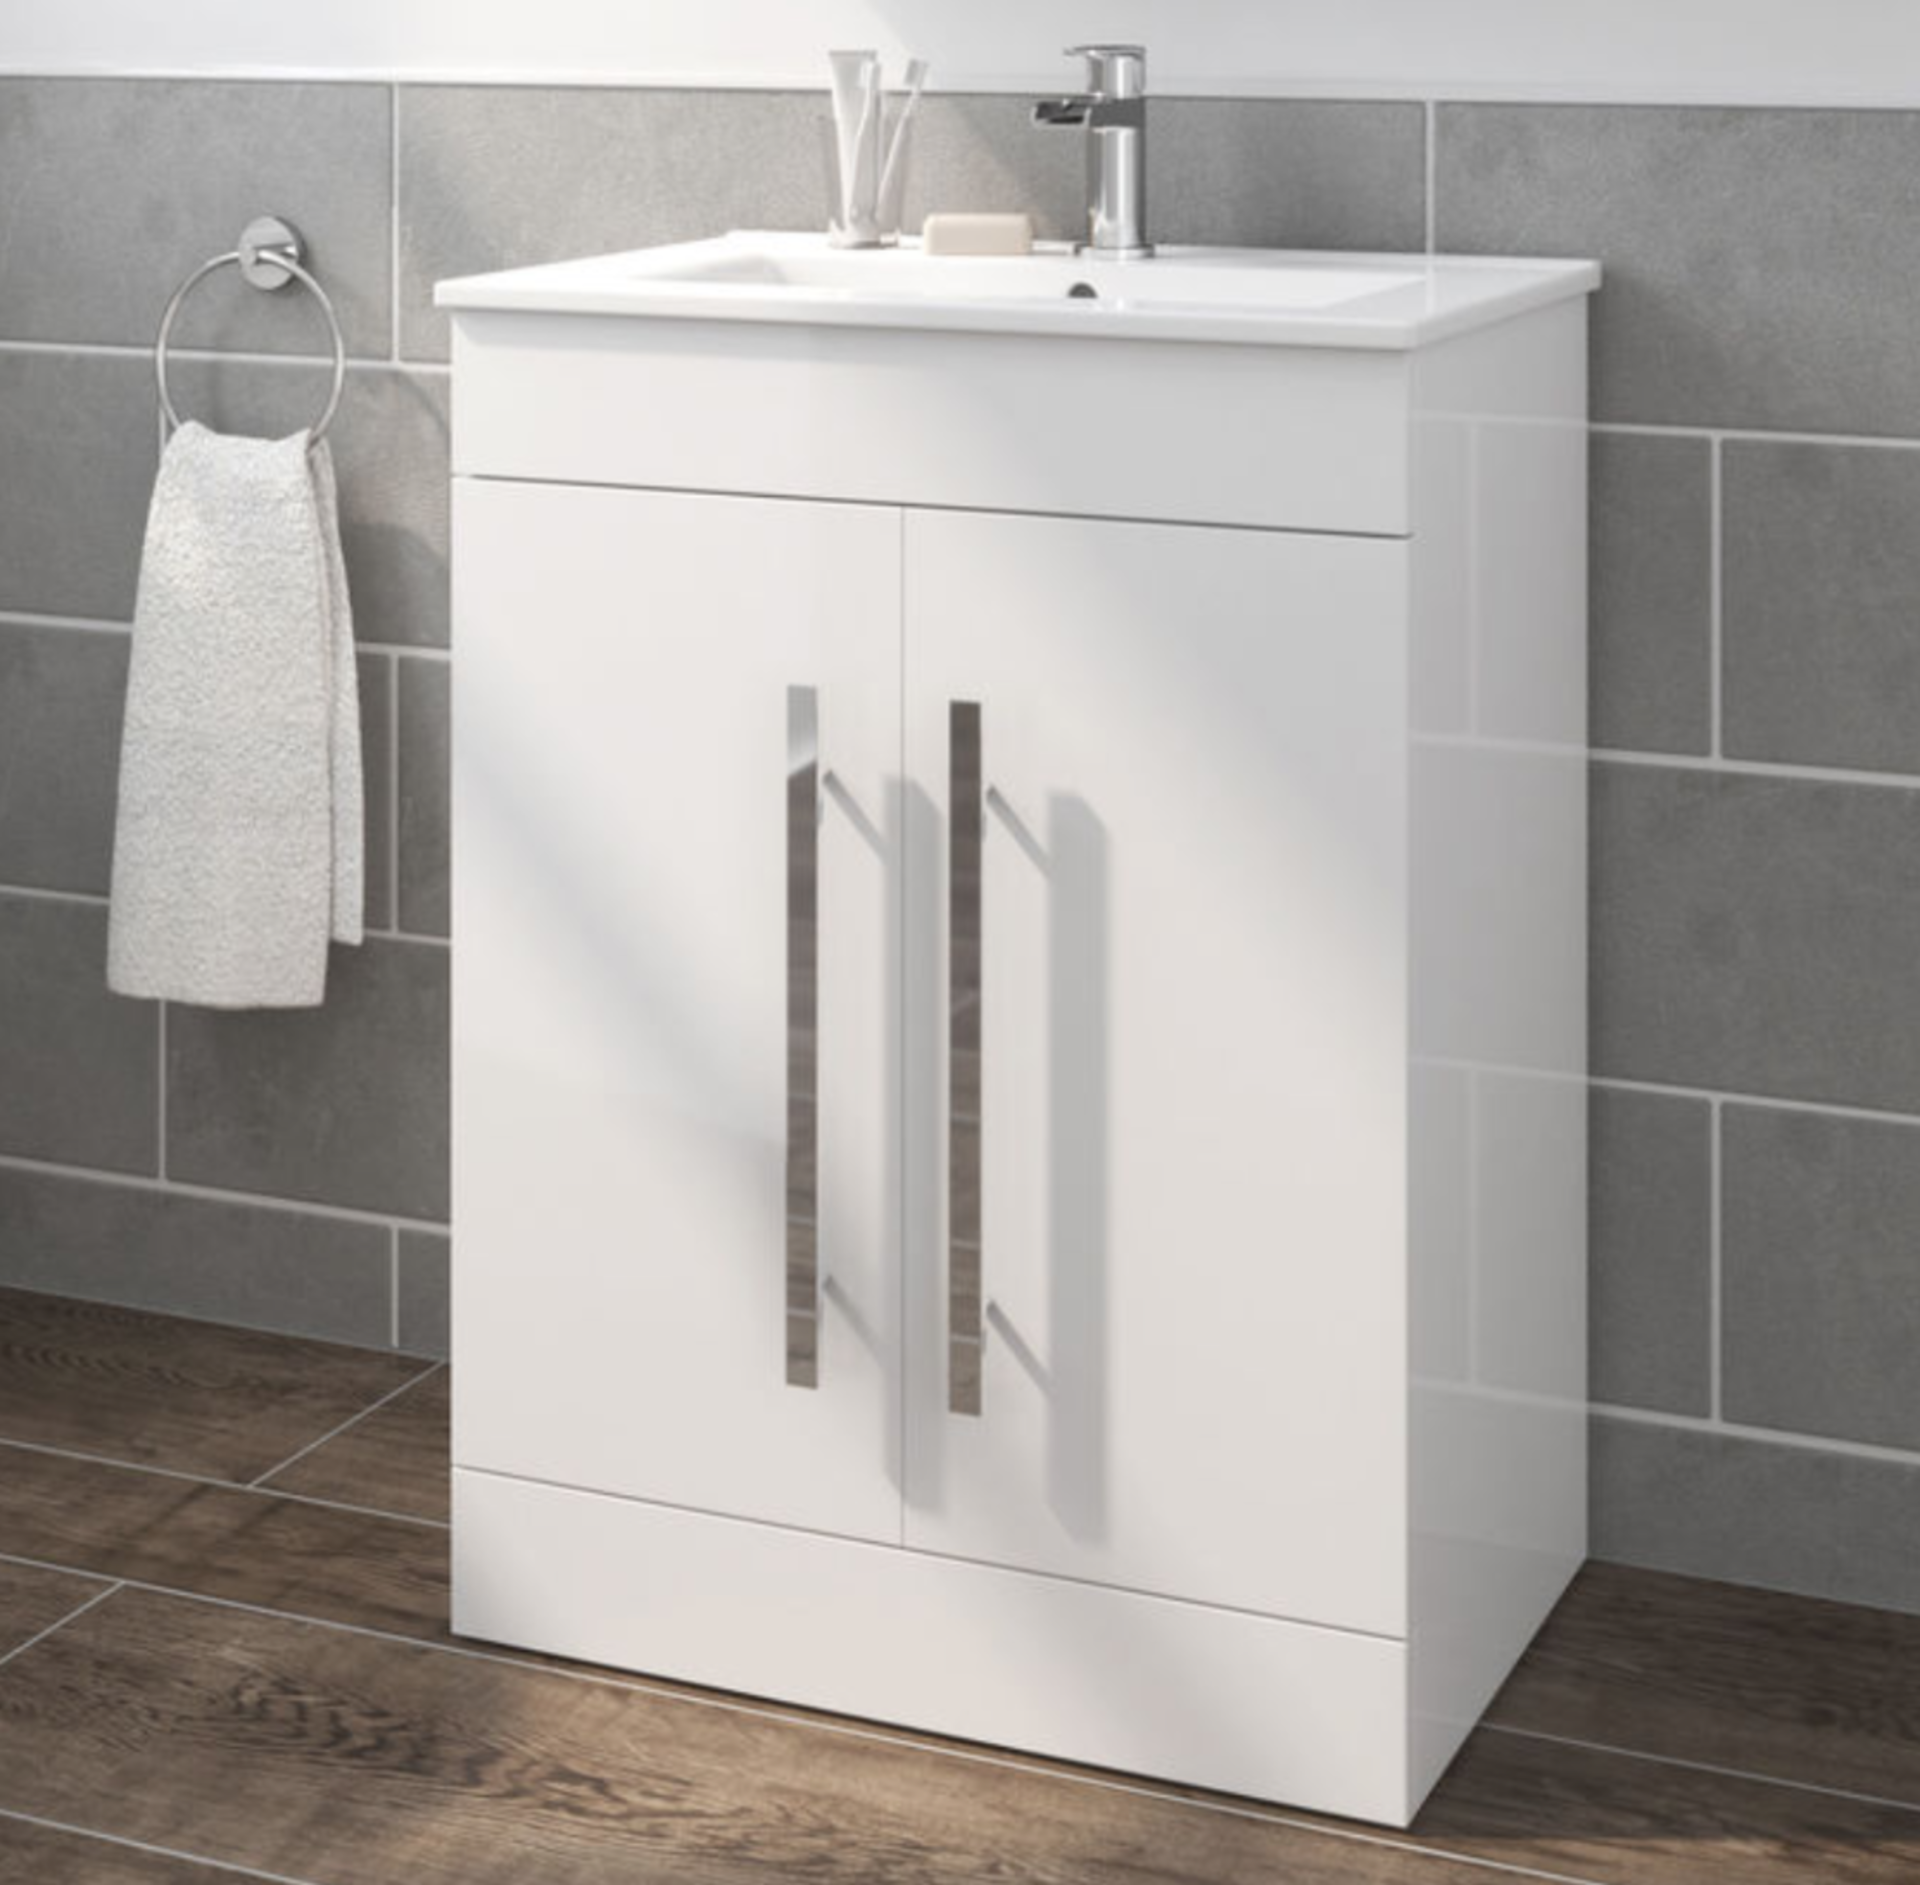 New Boxed 600mm Trent Gloss White Sink Cabinet - Floor Standing. RRP £499.99.Mf806. Comes Co...